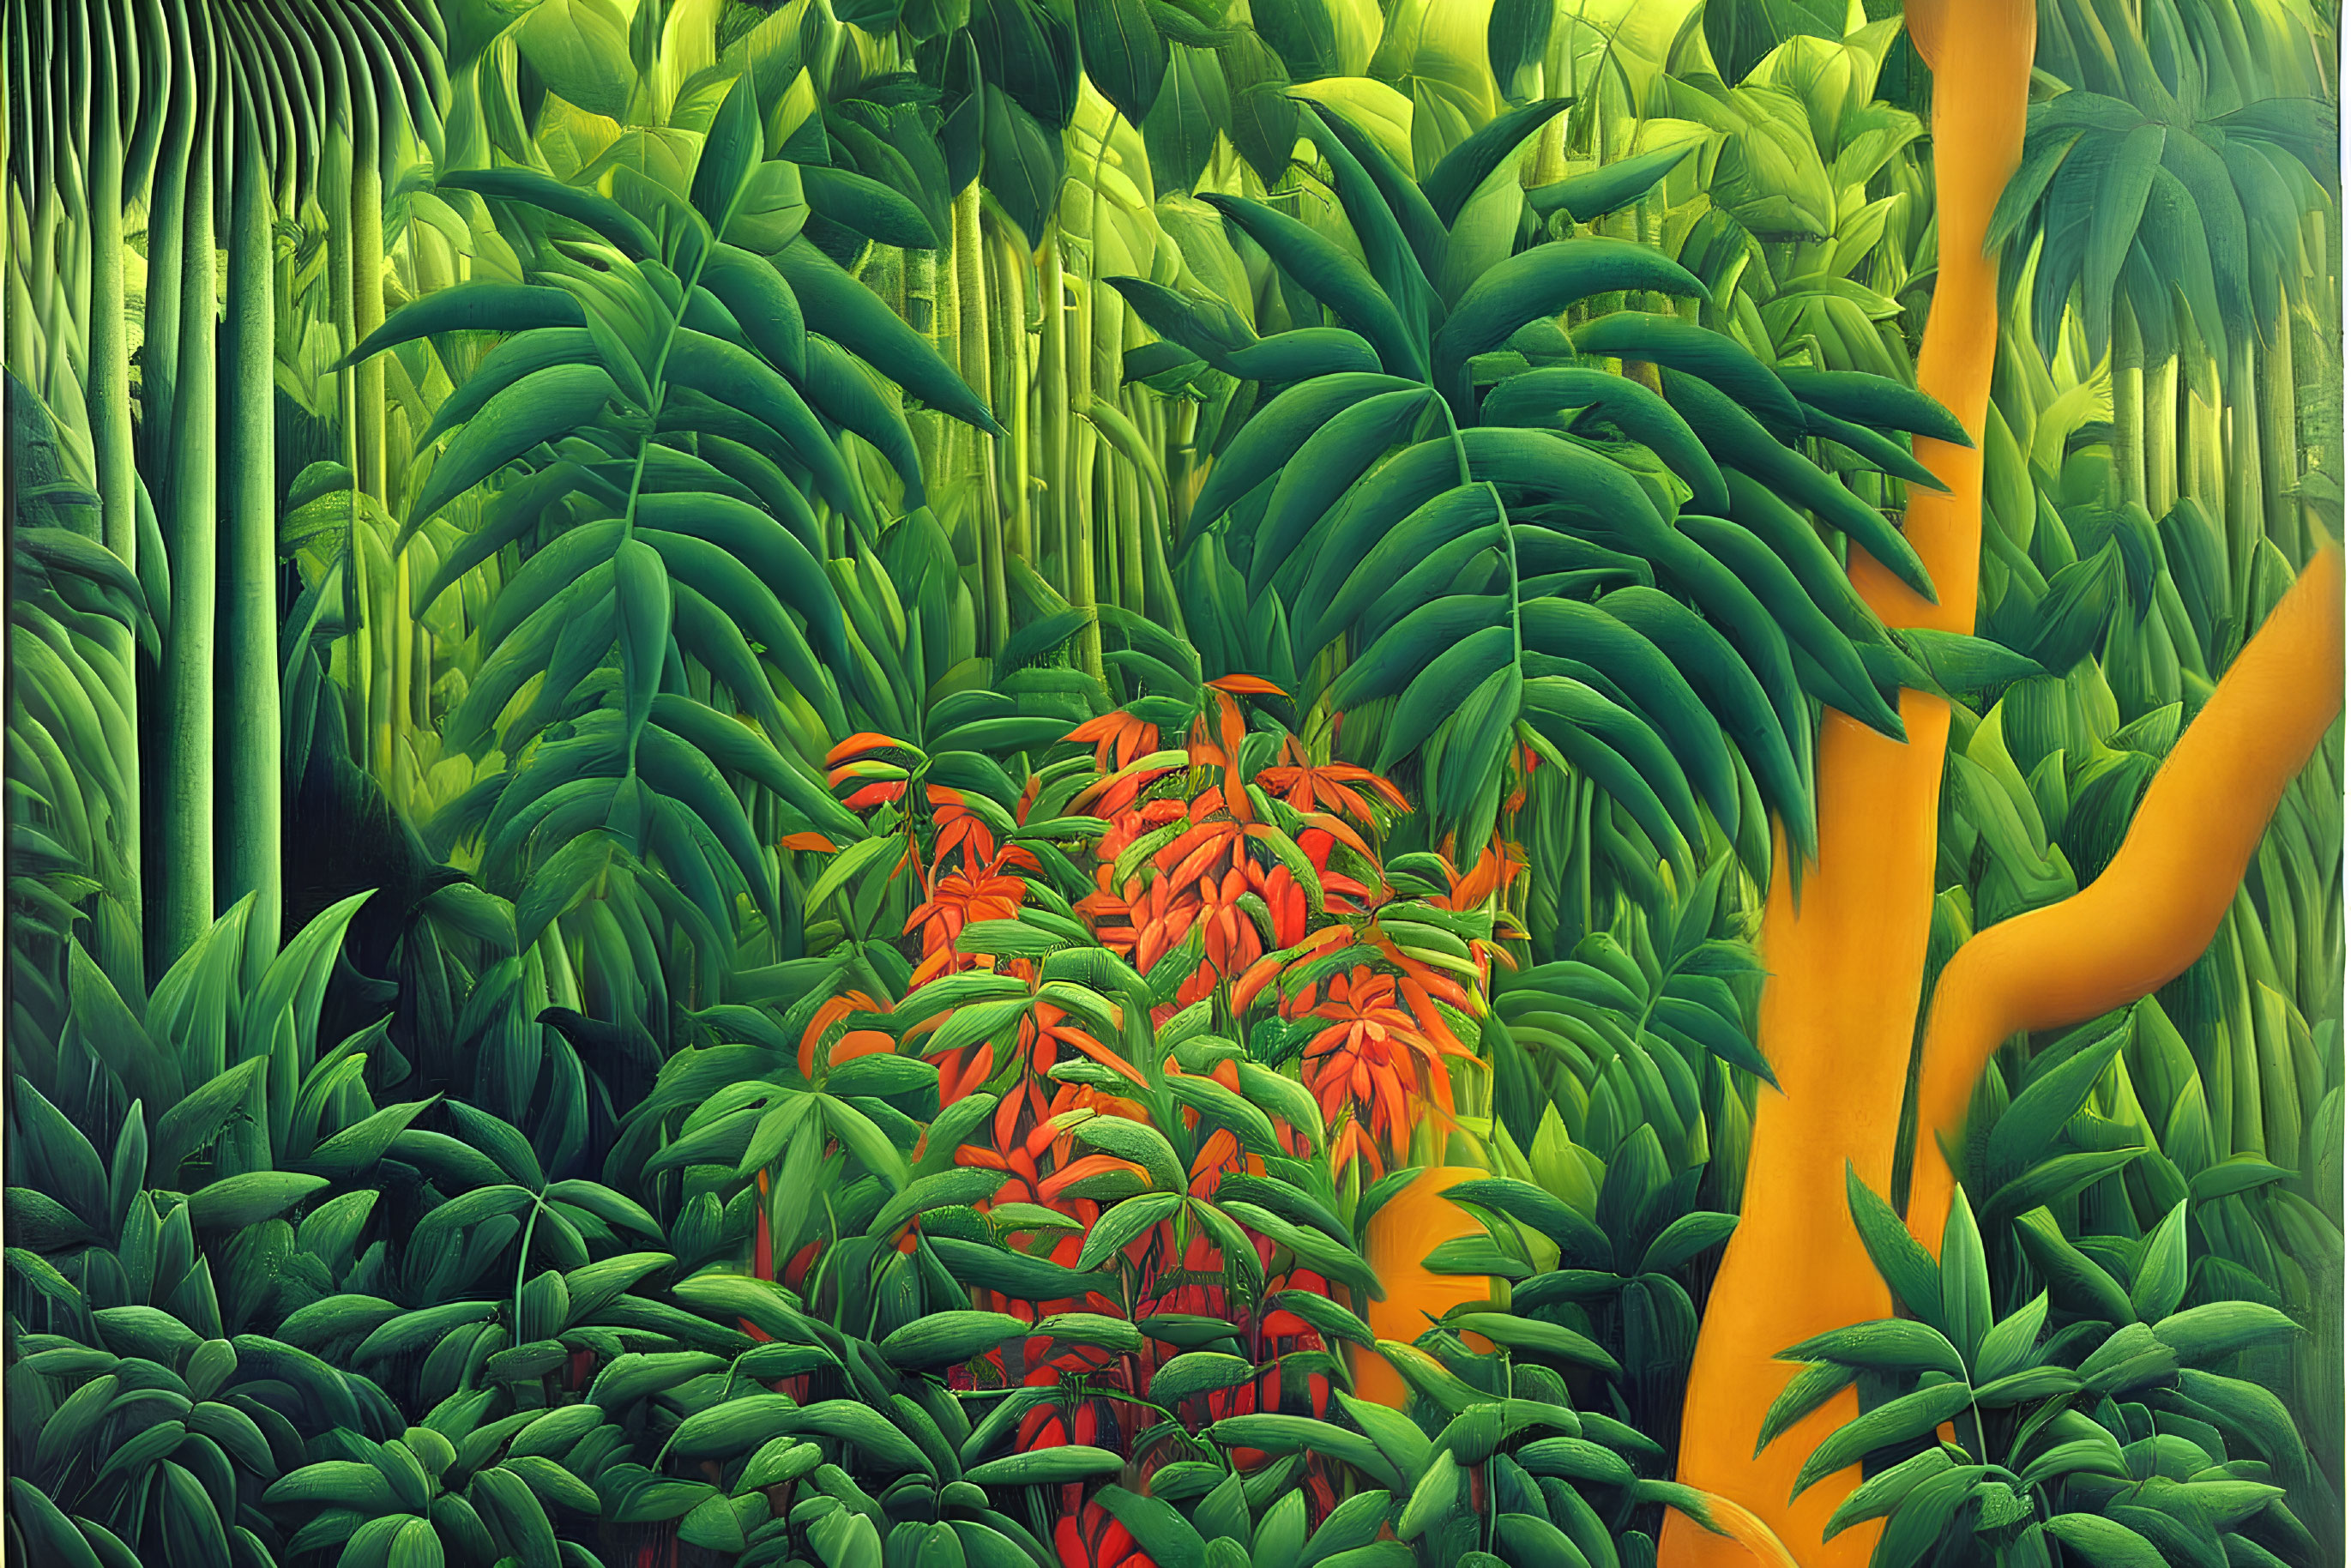 Lush Jungle Landscape with Green Foliage and Red-Orange Flowers